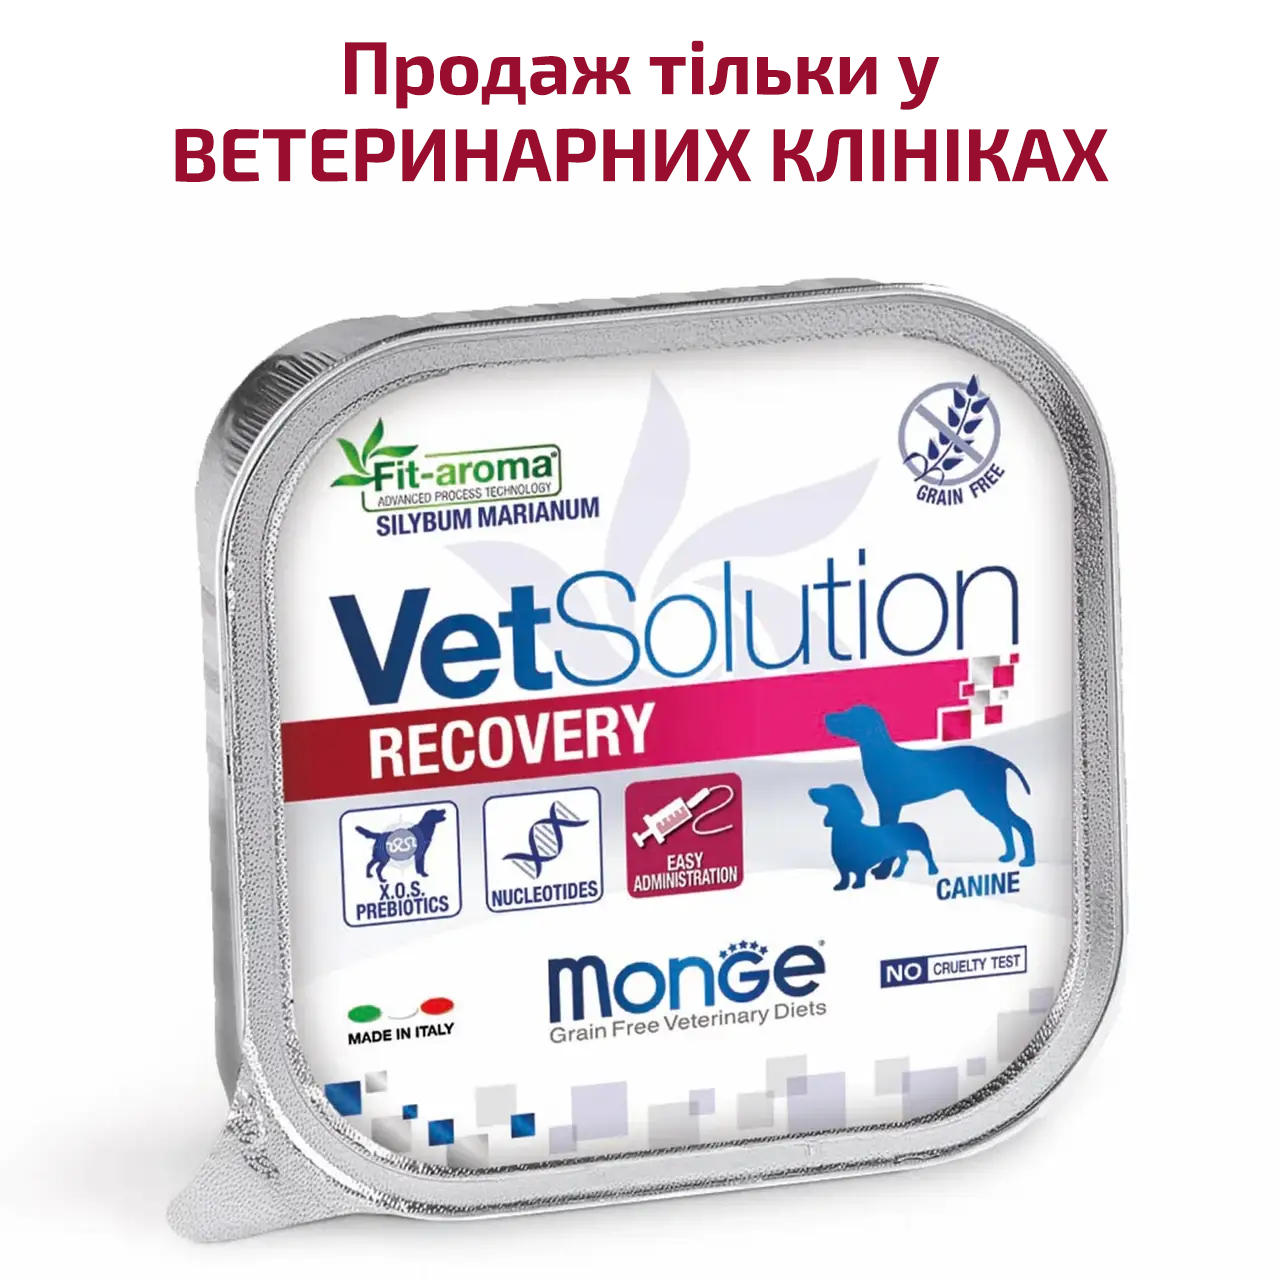 Monge VetSolution Wet Recovery canine - фото 1 - id-p1993400726